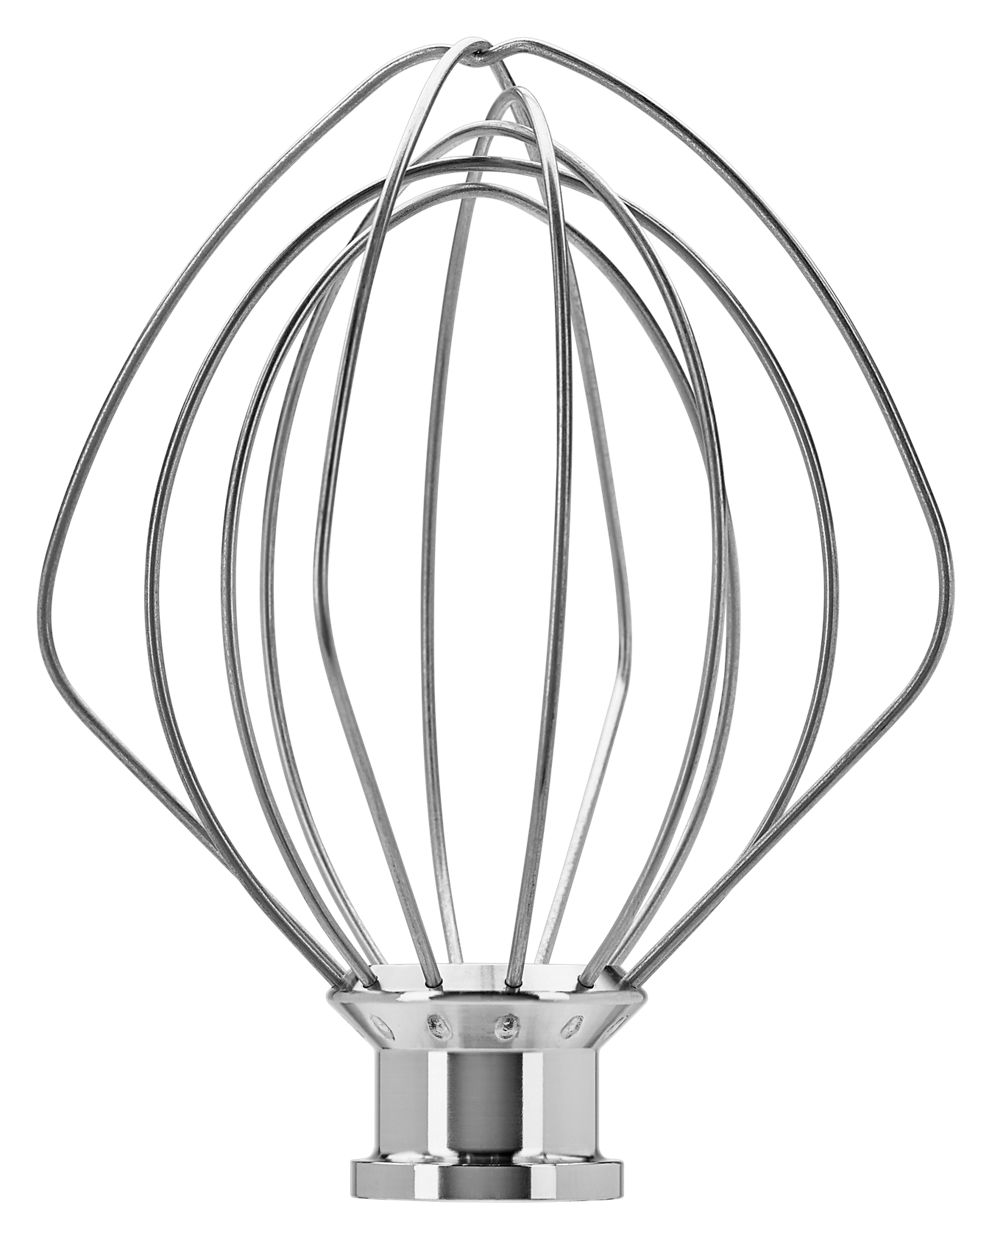 Stand mixer whisk attachment, stainless steel, KitchenAid 